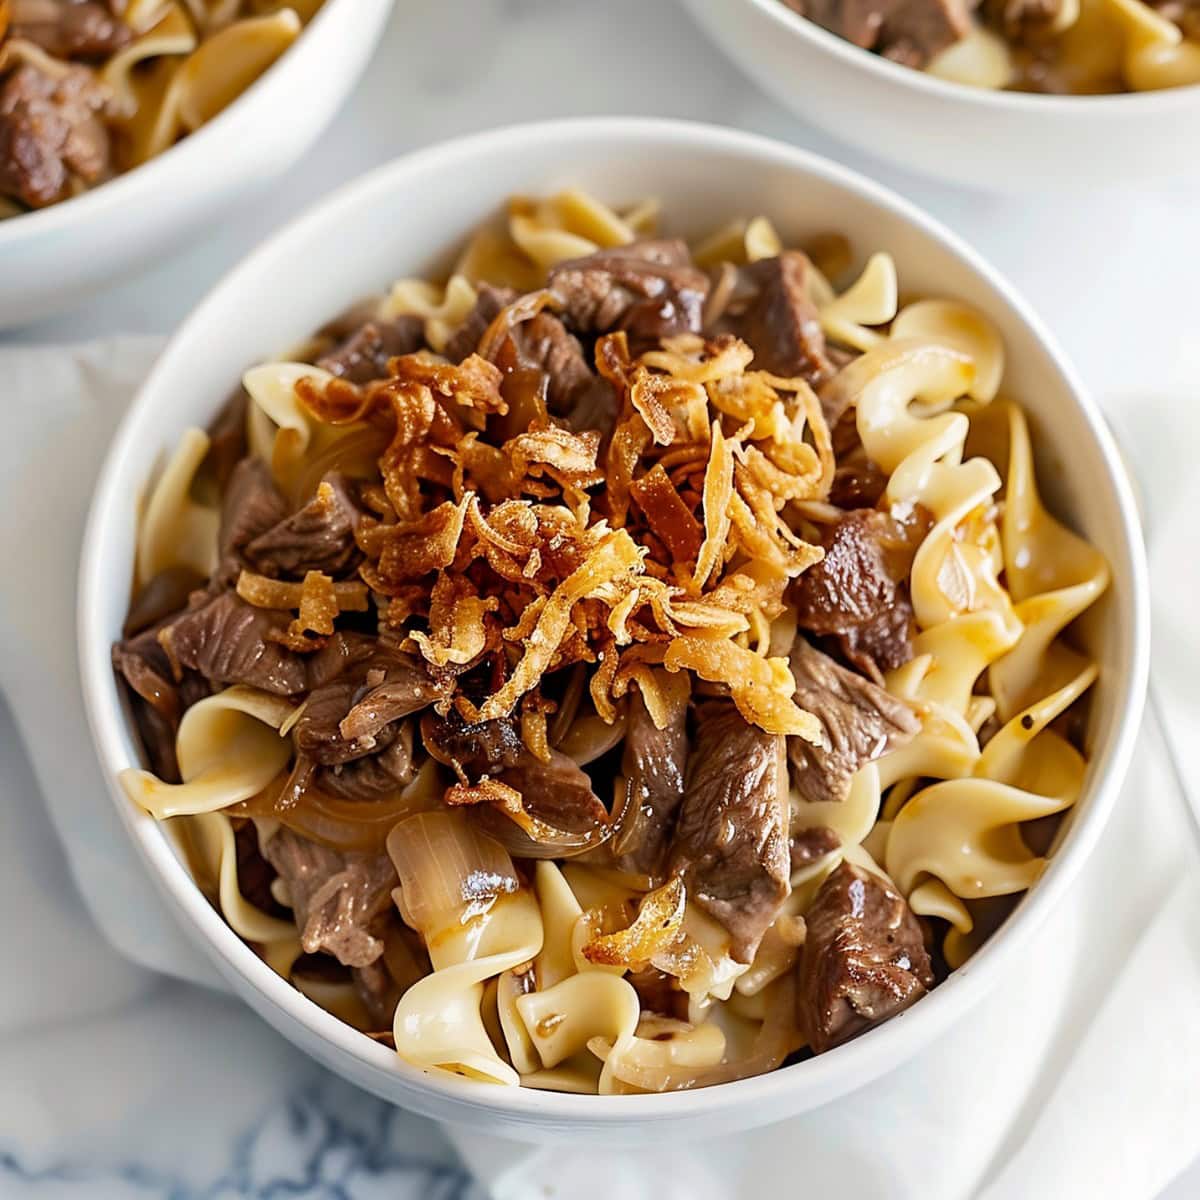 Savory and hearty dish of tender beef, caramelized onions, and egg noodles in a bowl